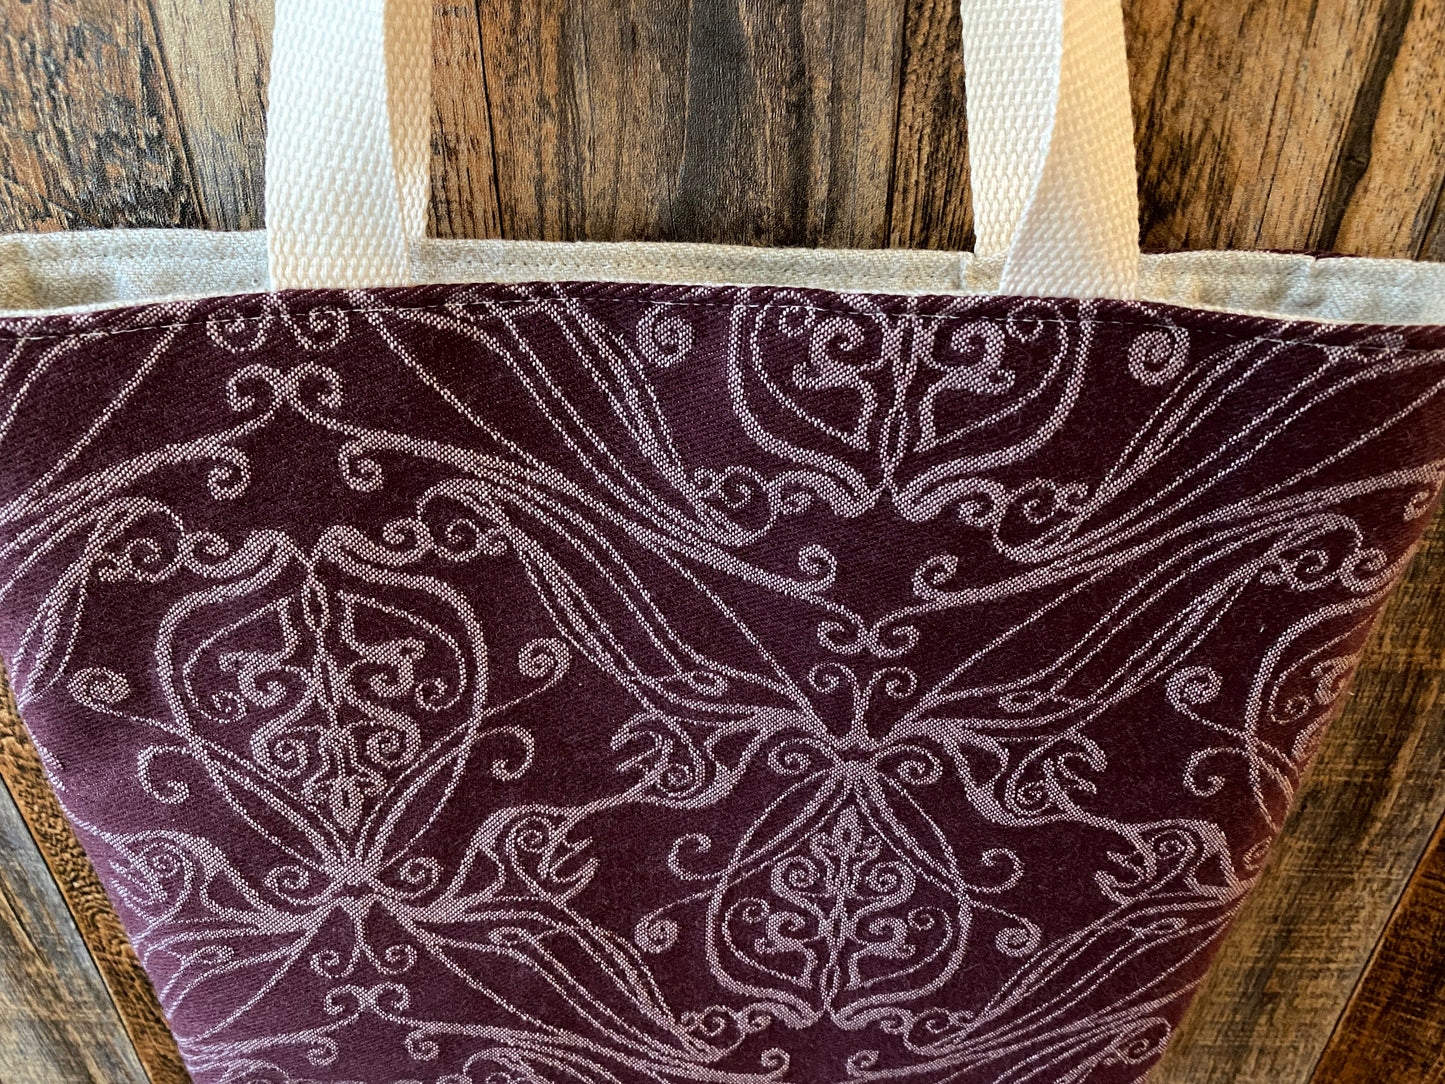 Merlot and Rose Enthralled Reader Library Tote Bag